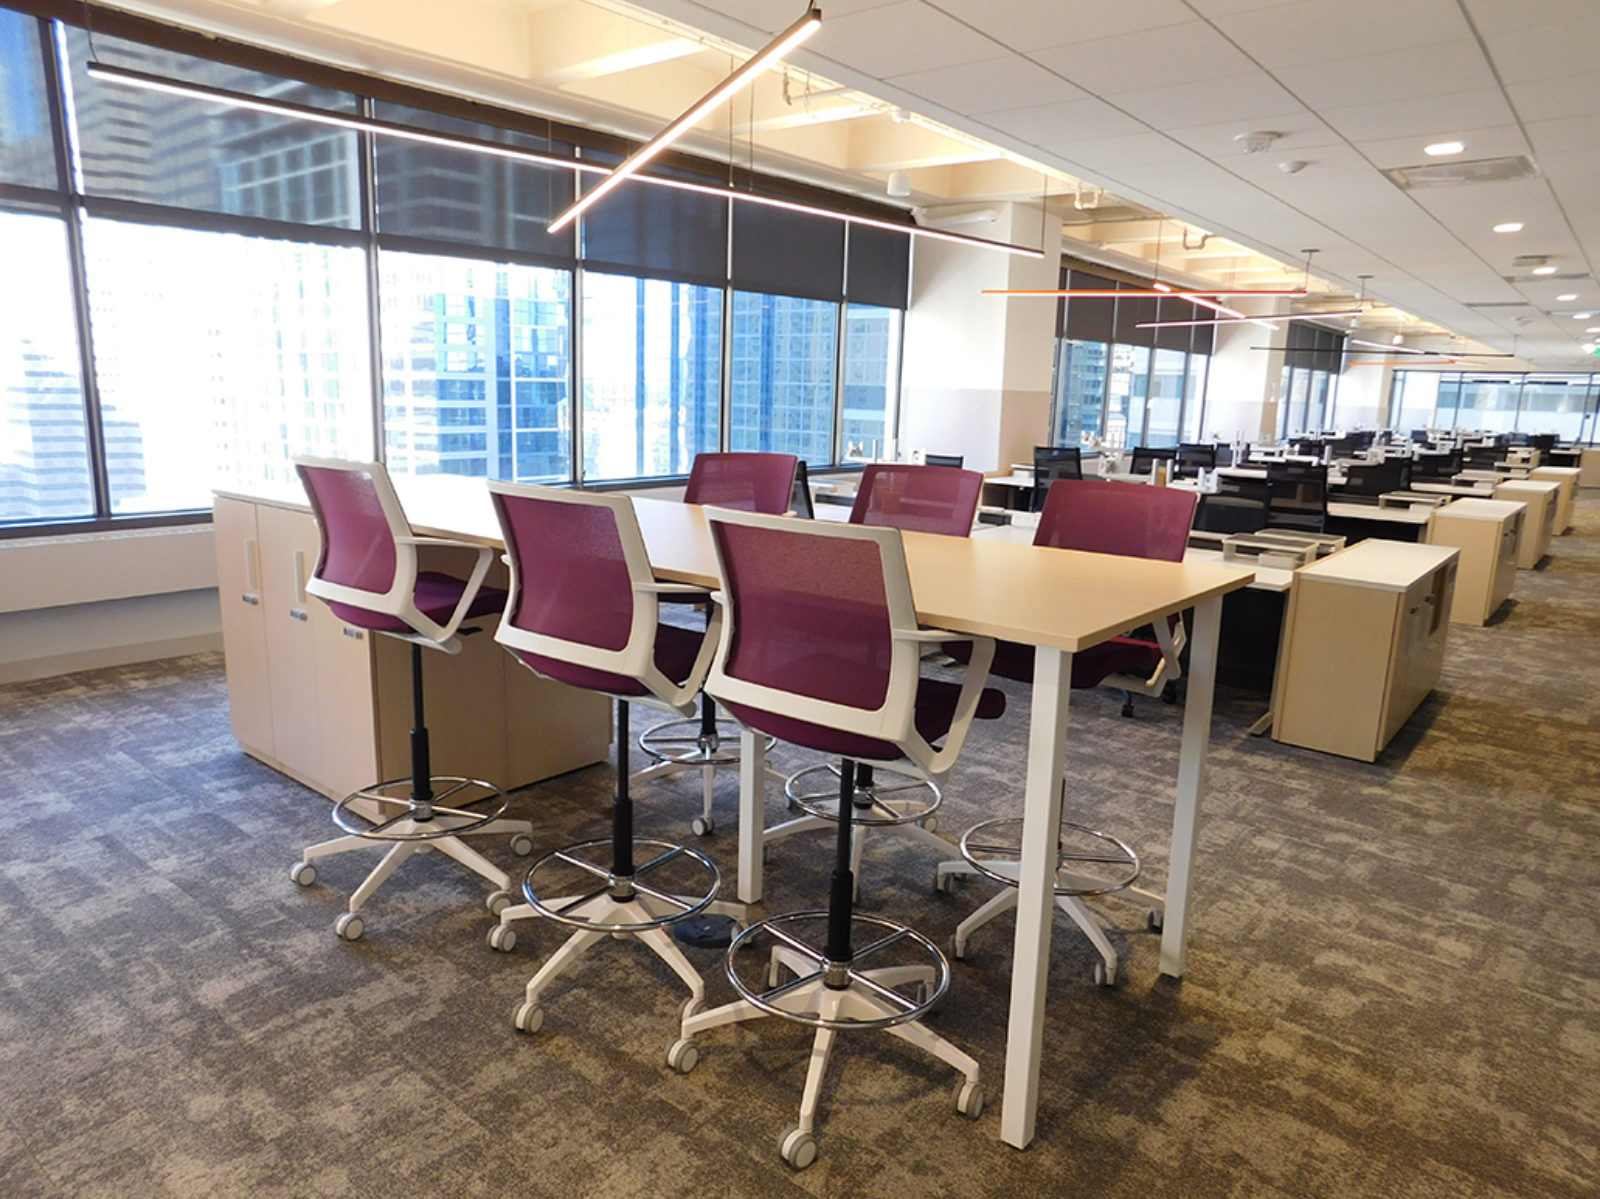 Collaborative table with burgundy mesh stools, clusters of workstations in background